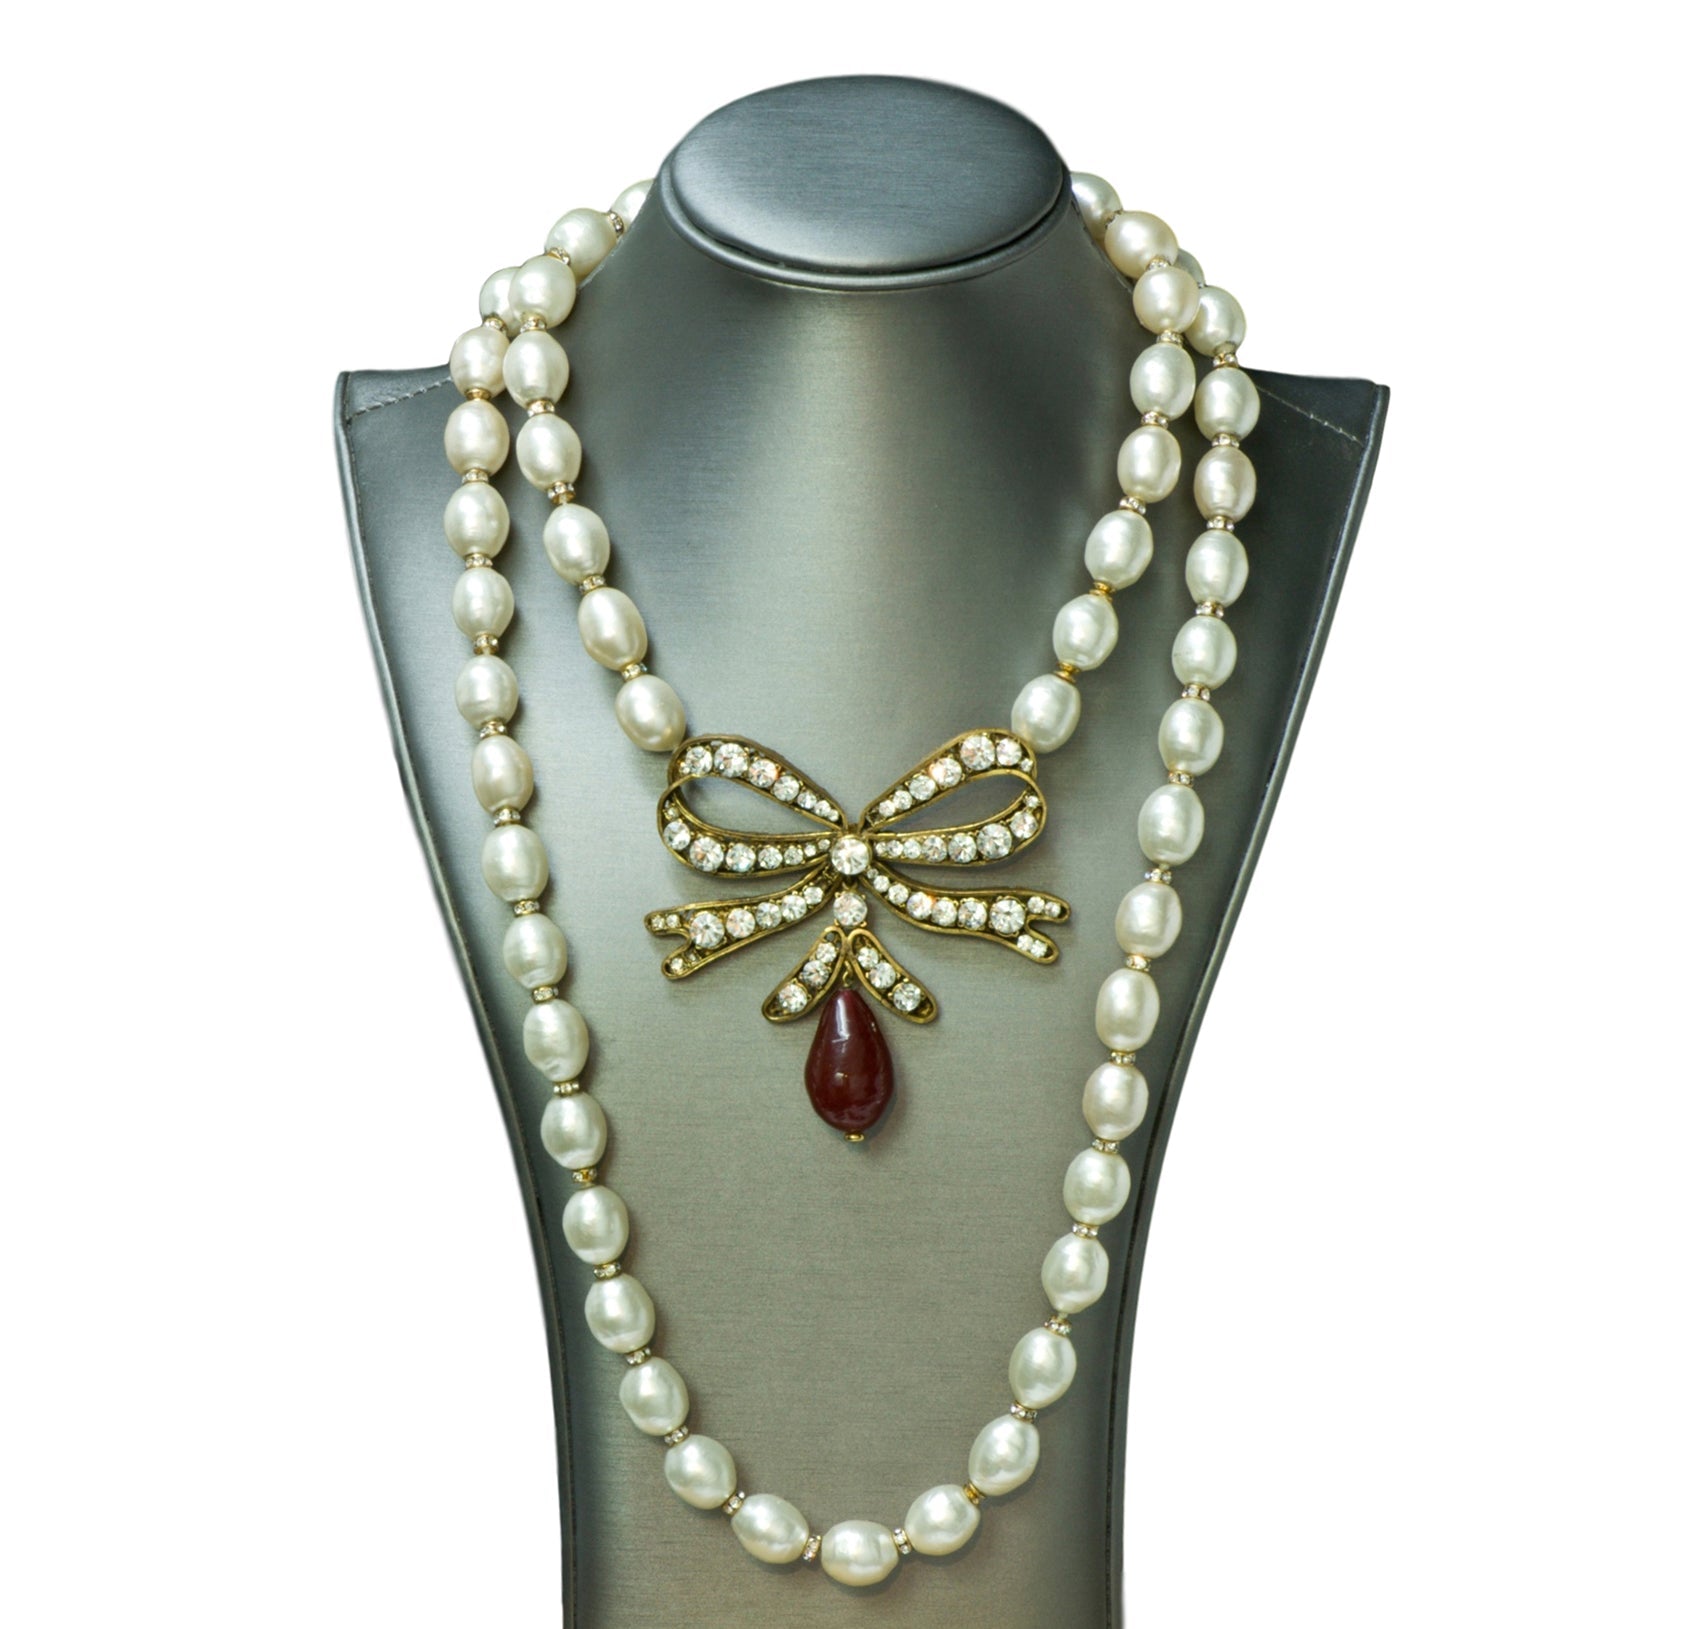 Coco Chanel Jewelry - All You Need To Know - DSF Antique Jewelry